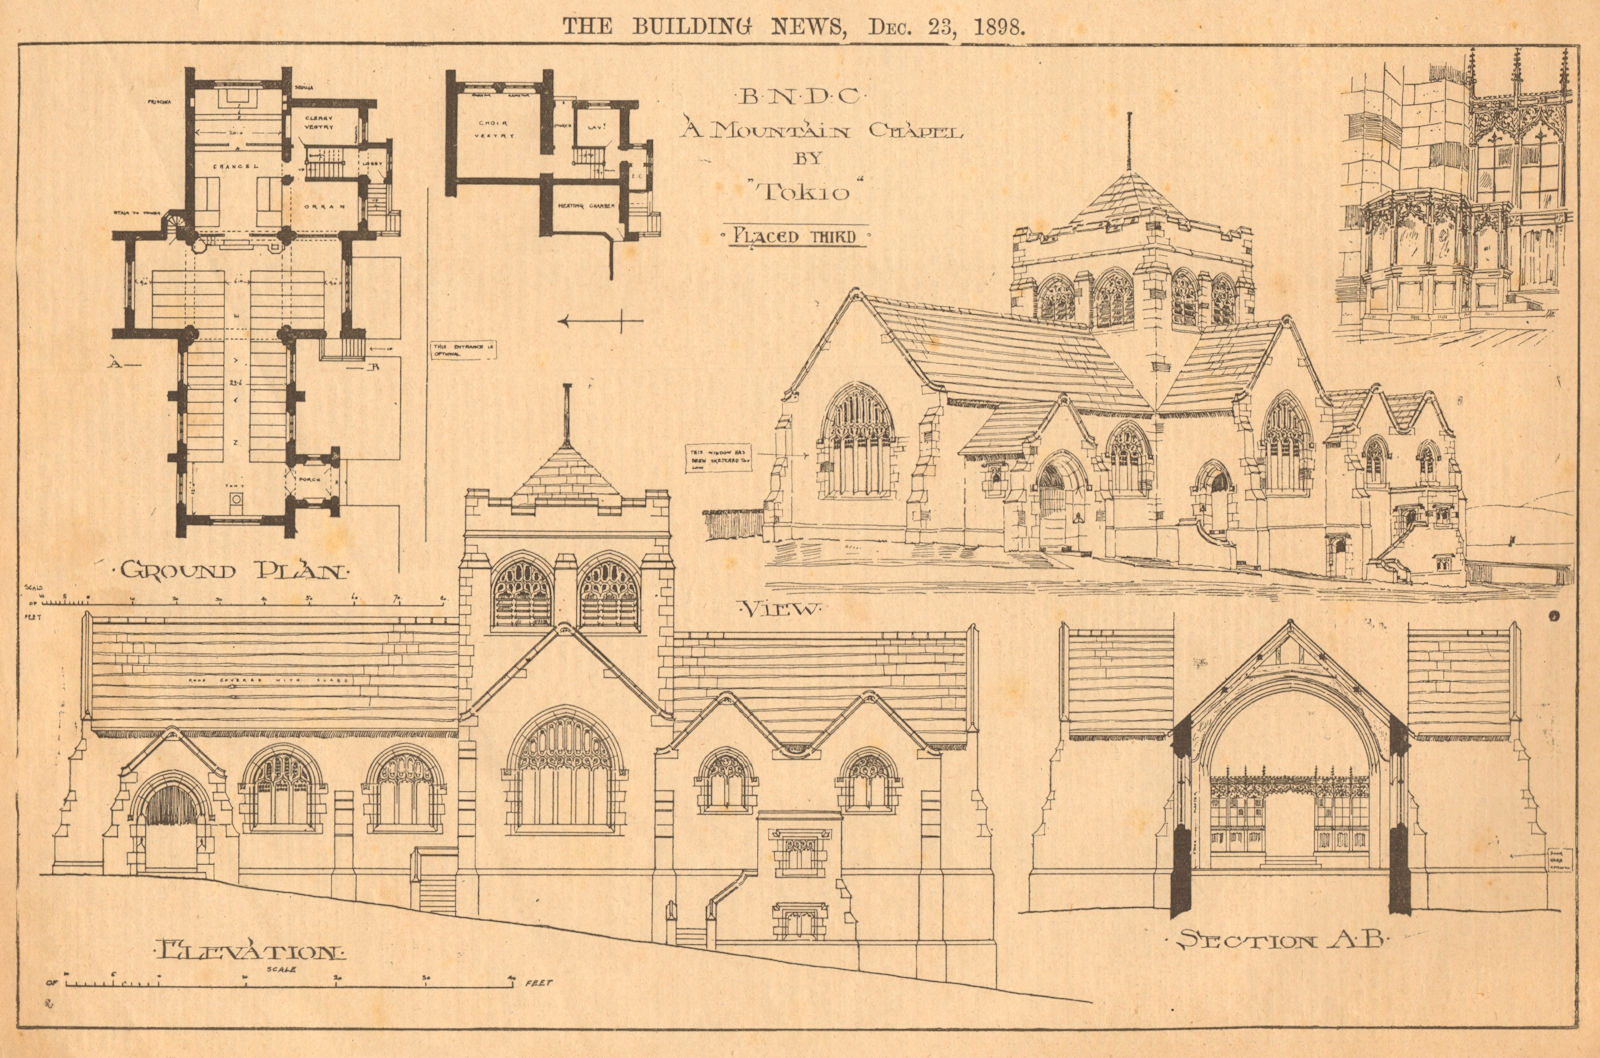 A mountain chapel by Tokio, placed Third. Ground plan, elevation 1898 print